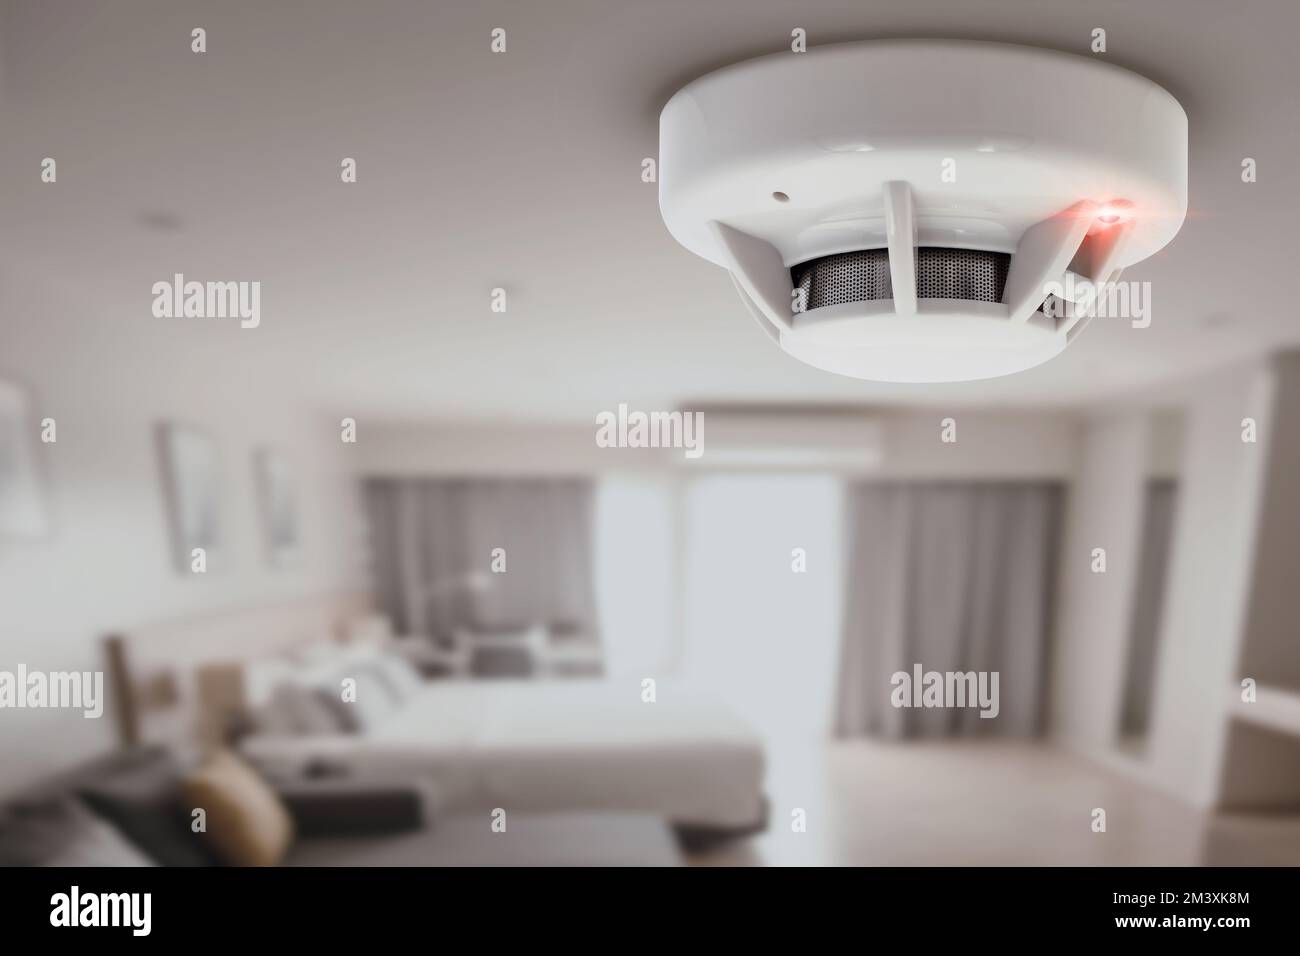 smoke detector fire alarm detector home safety device setup at home hotel room ceiling Stock Photo